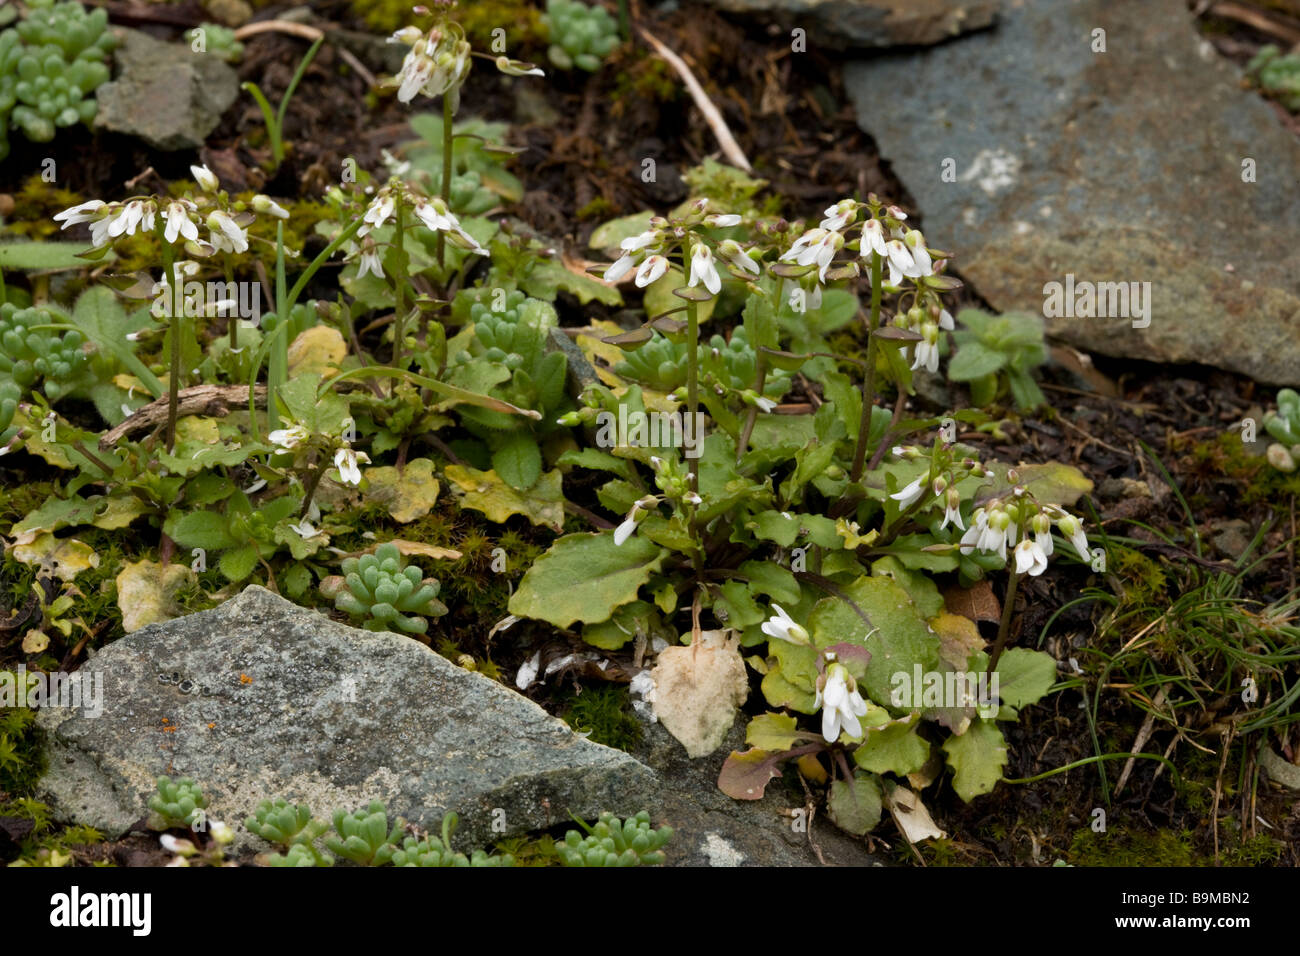 Cyprus Penny cress Thlaspi cypria endemic plant in the Troodos Mountains Greek Cyprus south Stock Photo